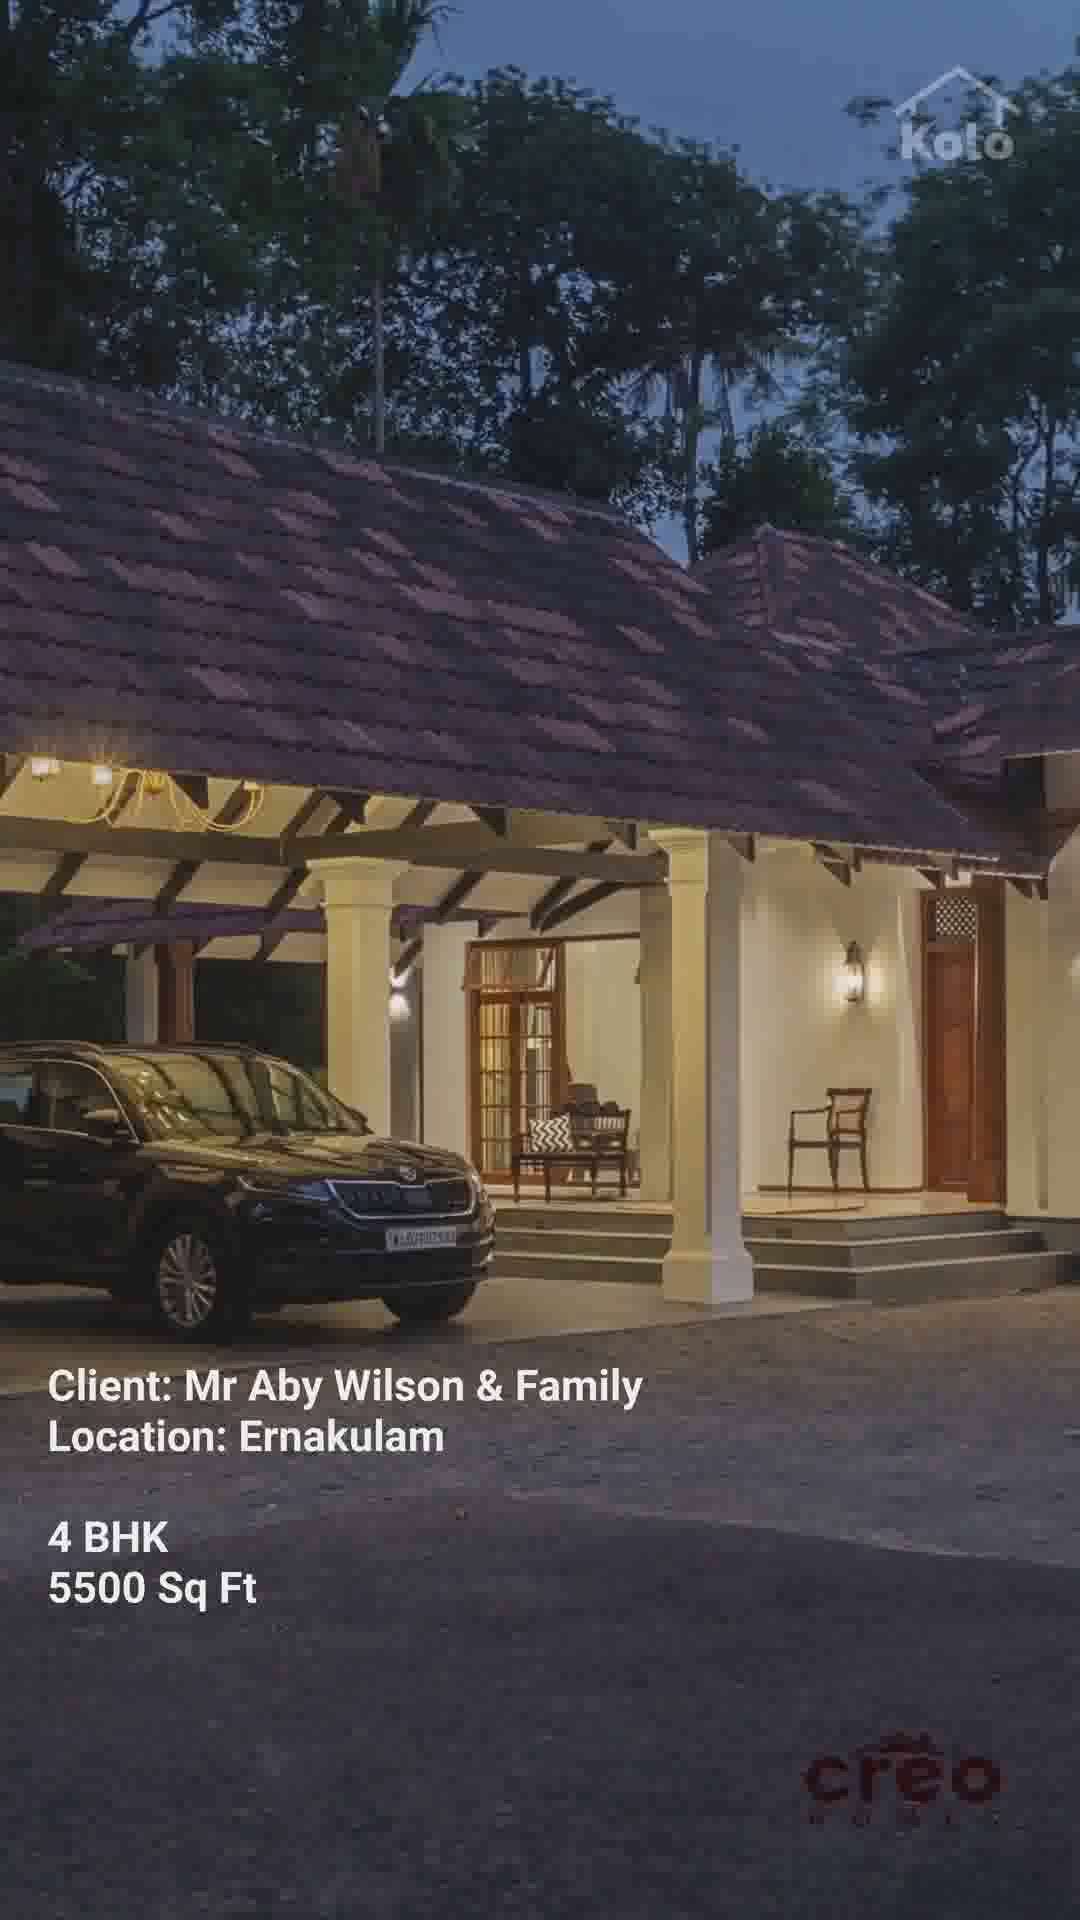 1.8 Cr | 5500 Sq. Ft | 35 Cents

Client name: Mr. Aby Wilson & Family
Location: Ernakulam, Kalady

Budget: 1.8 Cr
Sqft: 5500 Sq. Ft
Plot area: 35 Cents
BHK: 4 BHK

Name: Ginu M
Contact number: 9645899951
Firm name: Creo Homes Pvt. Ltd.
@creoarchitects
Architect: Sreerag Paramel
Location: Panampilly Nagar

Photographer: @nathanphotos.in